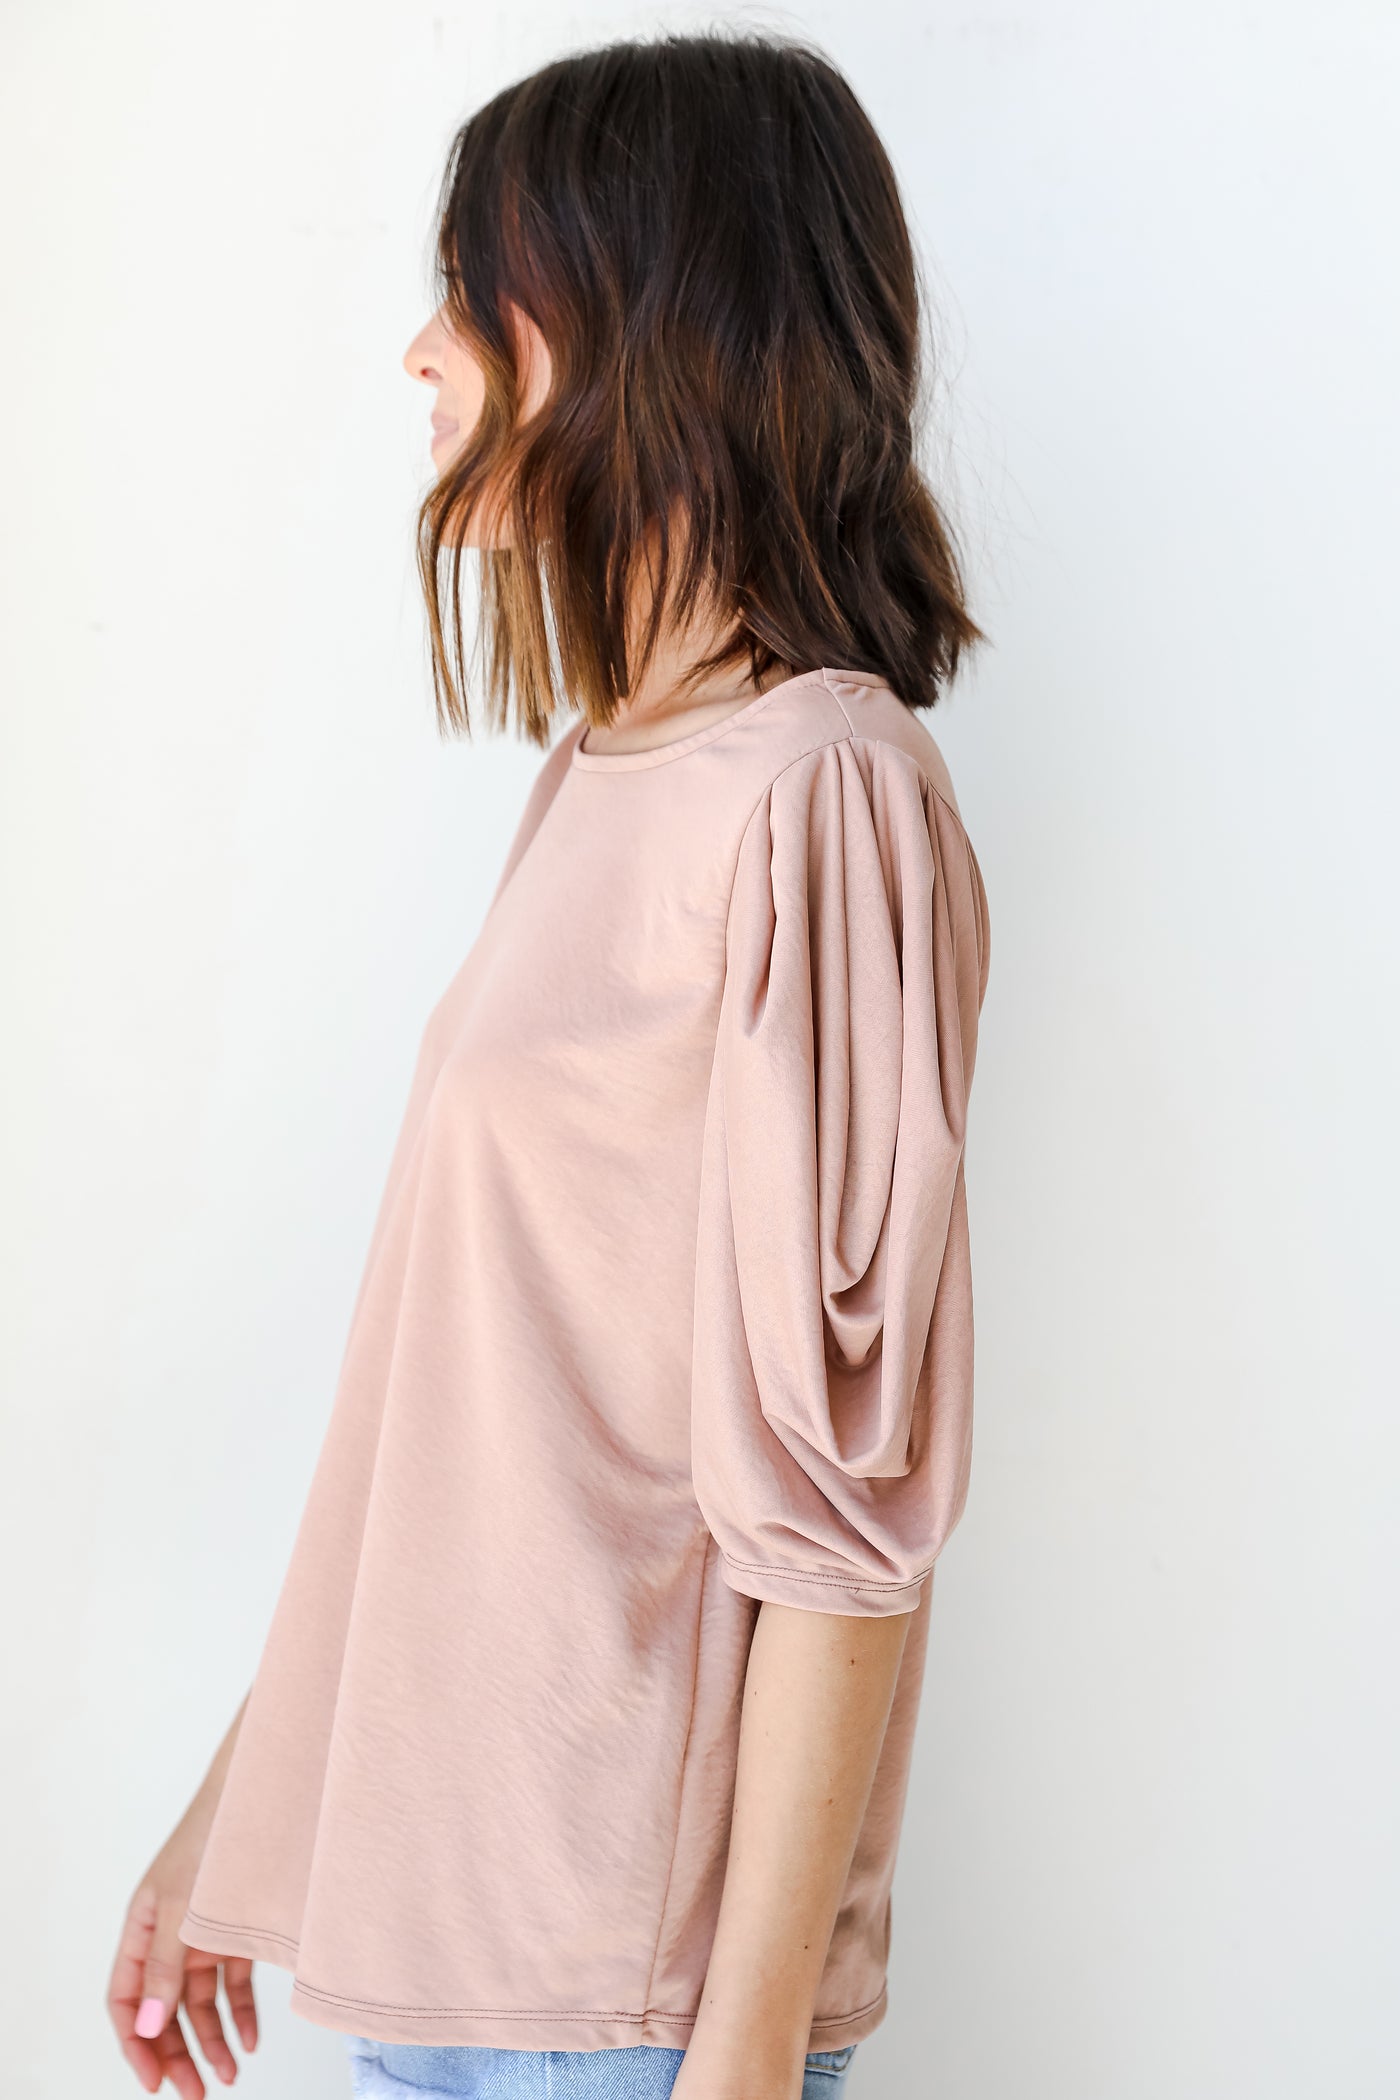 Puff Sleeve Top in blush side view